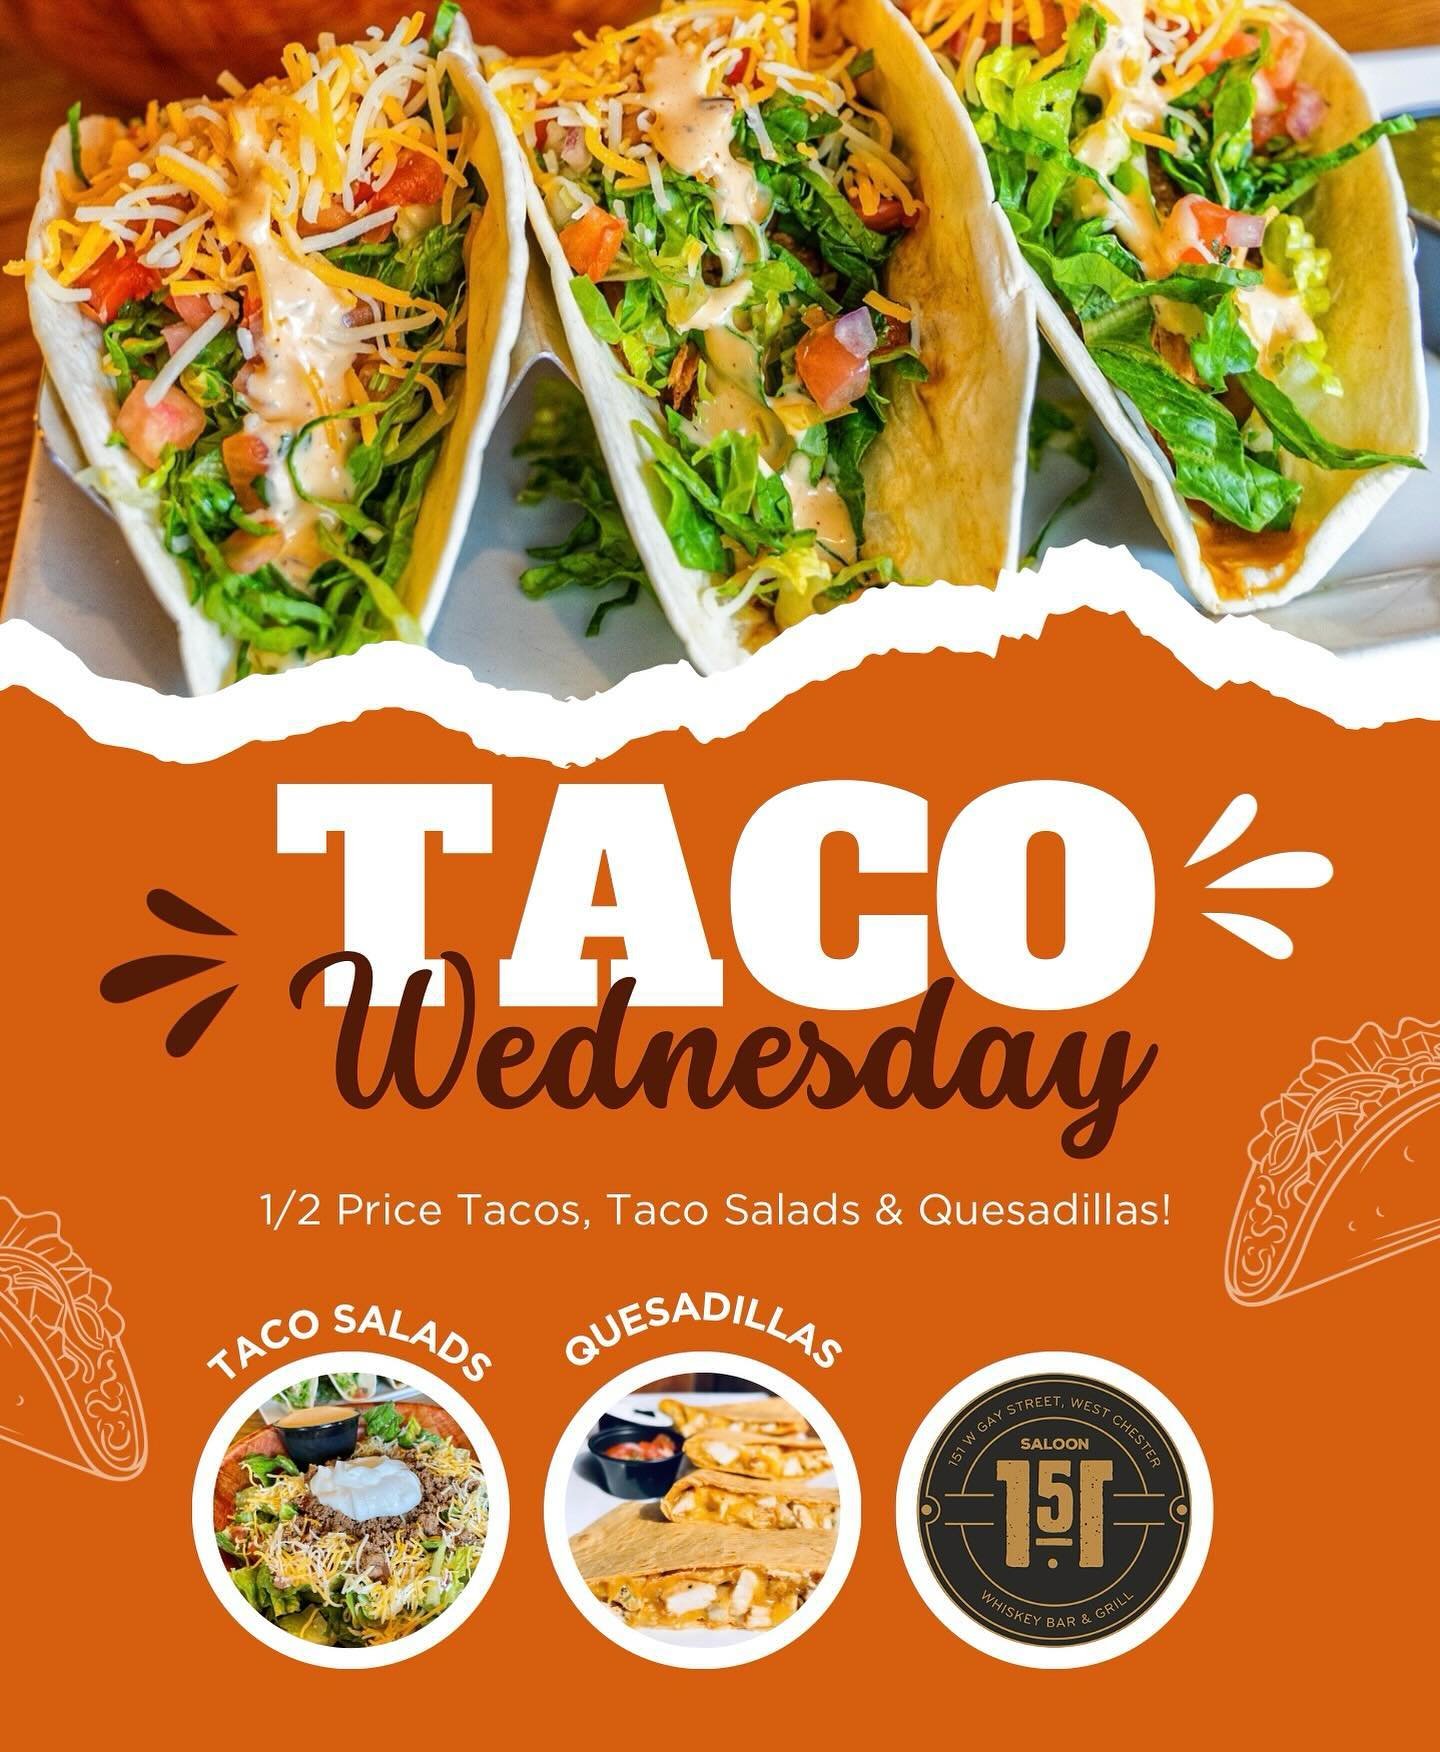 🌮 1/2 price tacos, taco salads &amp; quesadillas ALL DAY! Weekly Music Bingo starts up at 9pm 🎵 5 chances to win a gift card! #westchesterpa #downtownwestchesterpa #wcupa #wcuofpa #westchesterborough #westchesteruniversity #saloon151 #westchester #